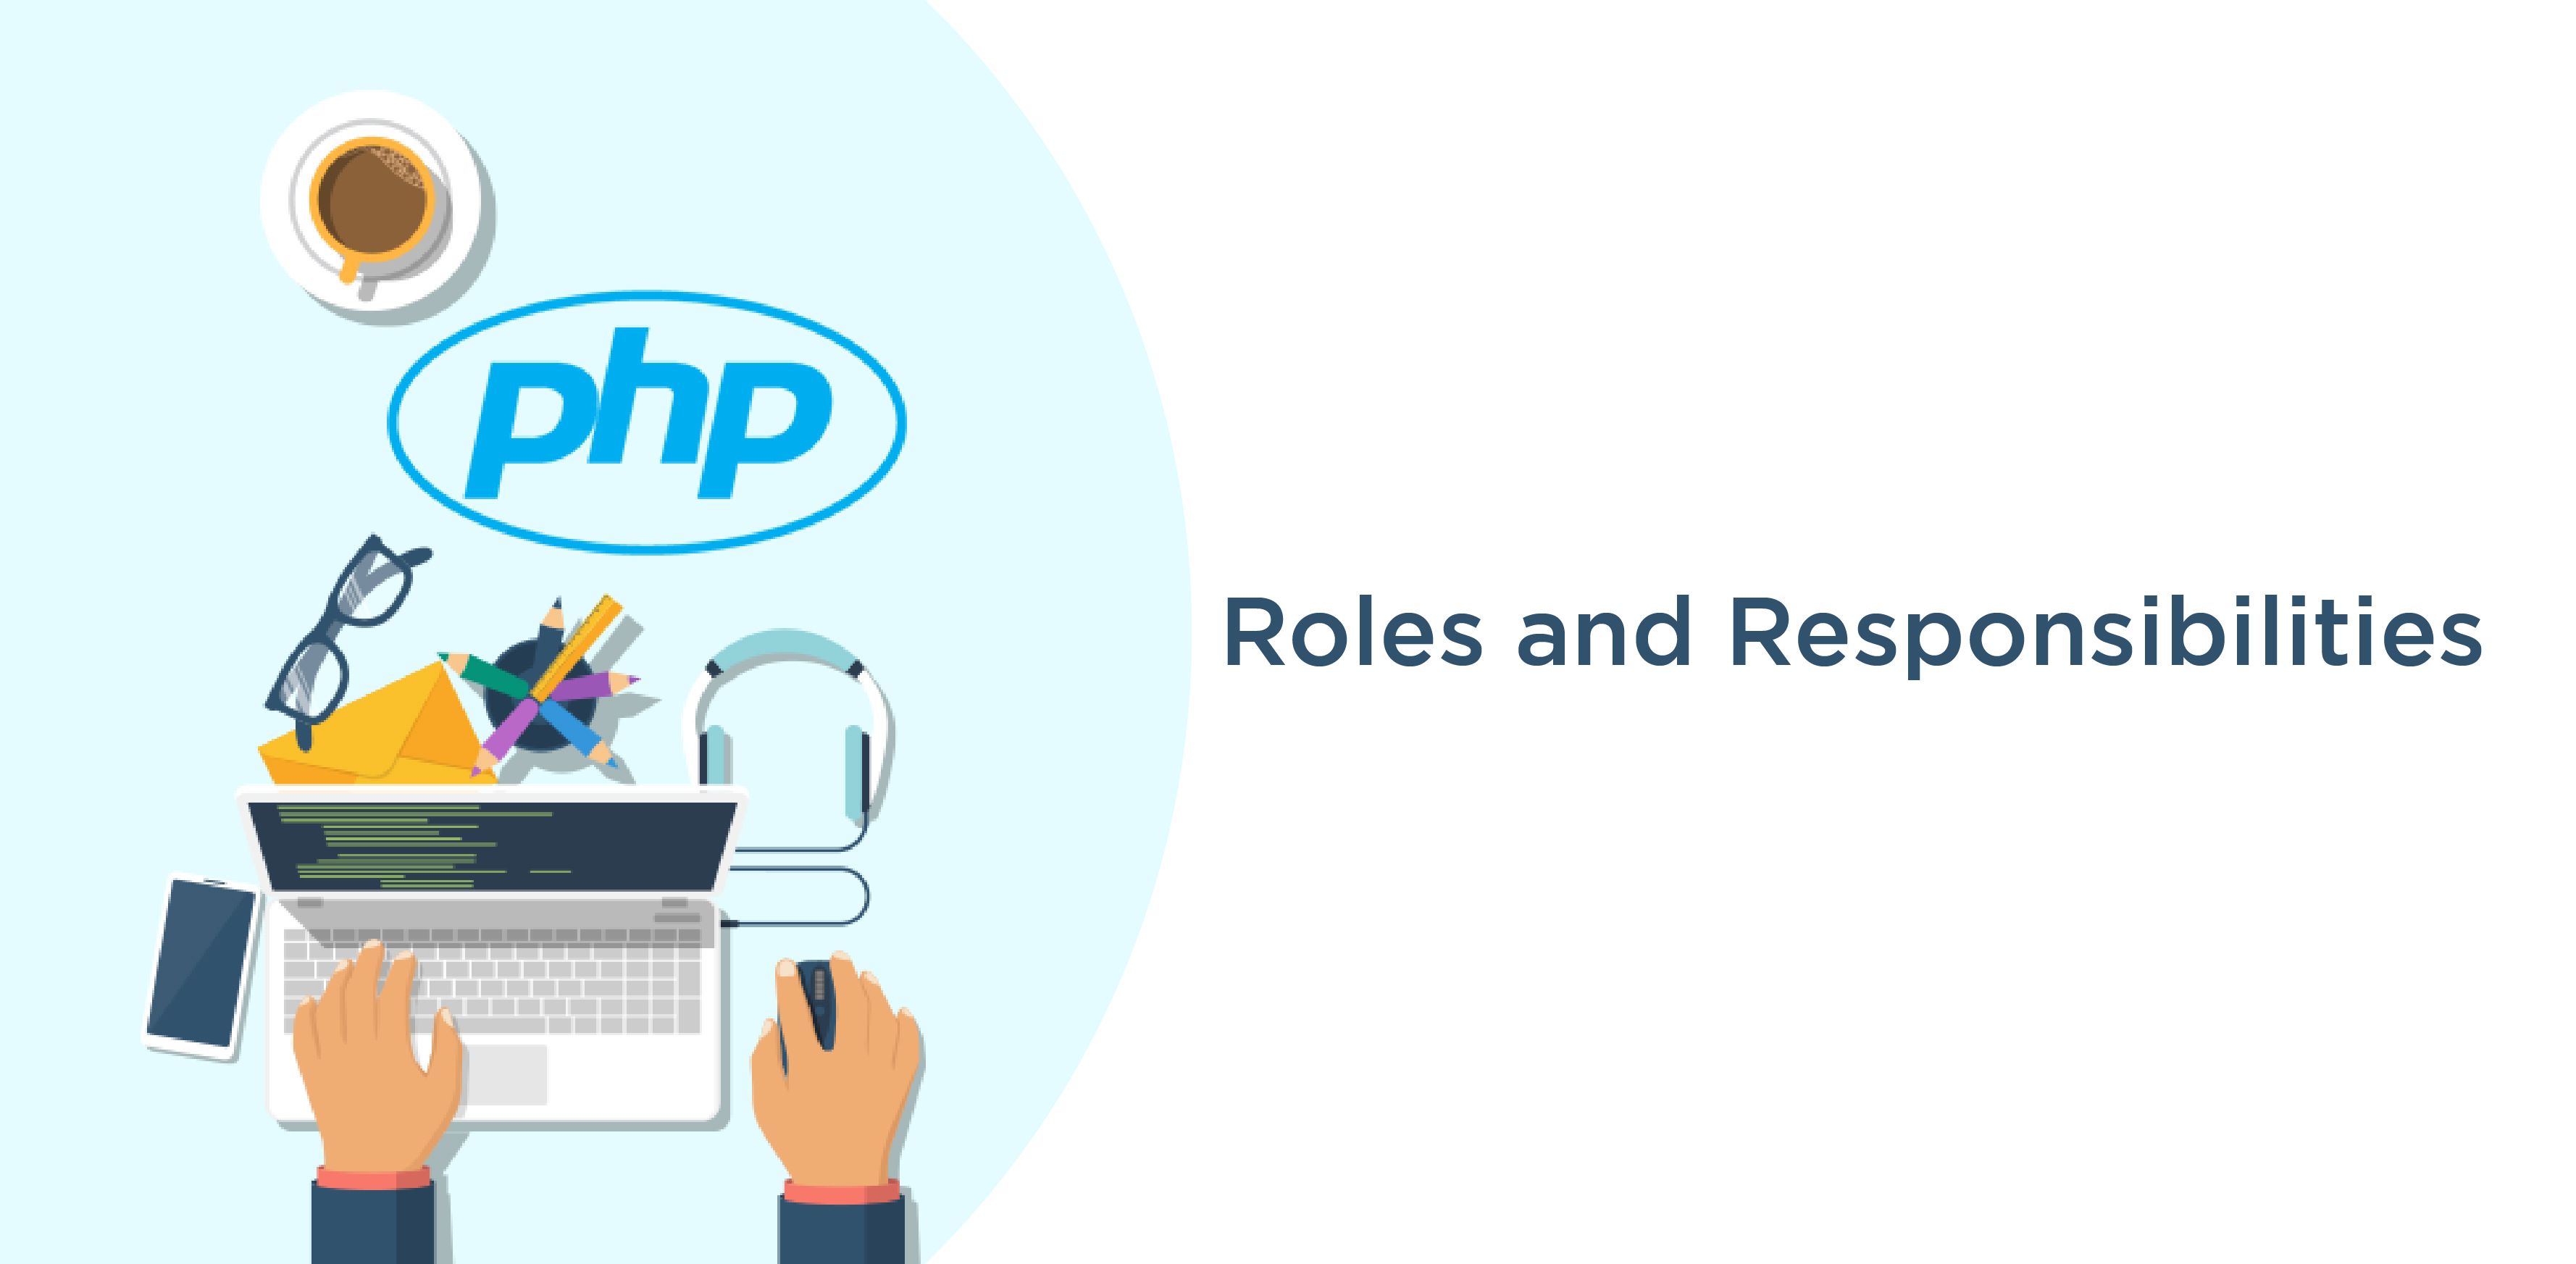 roles and responsibilities of PHP Developers